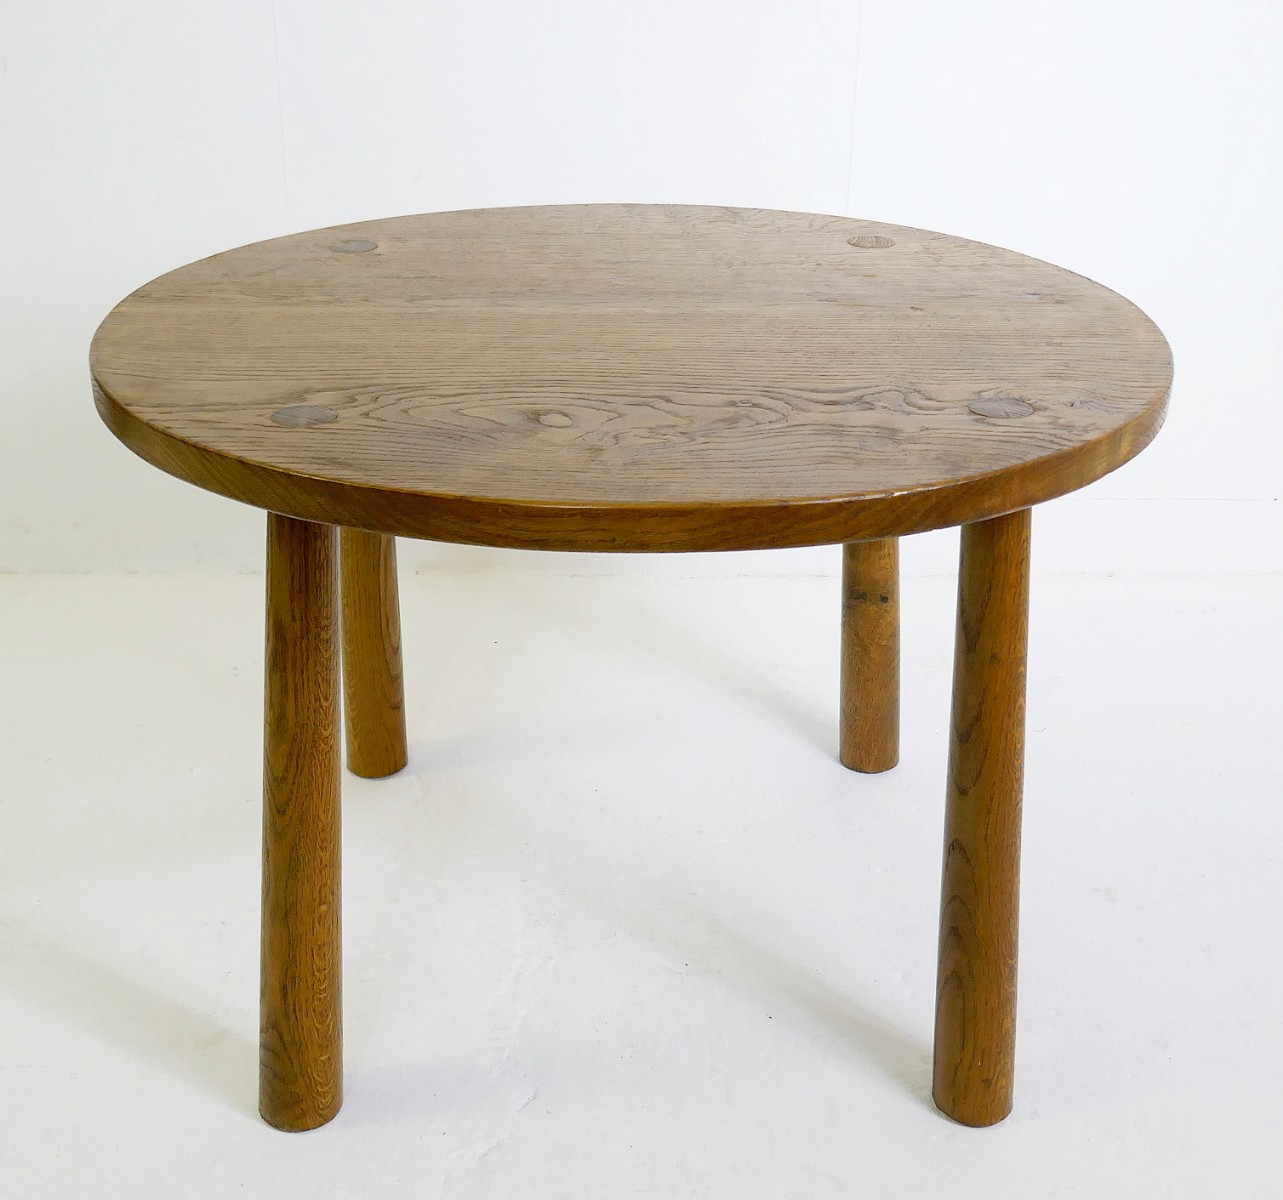 Solid Wood Small Round Table Stools Sold Separately Stools Search Results European Antiques Decorative